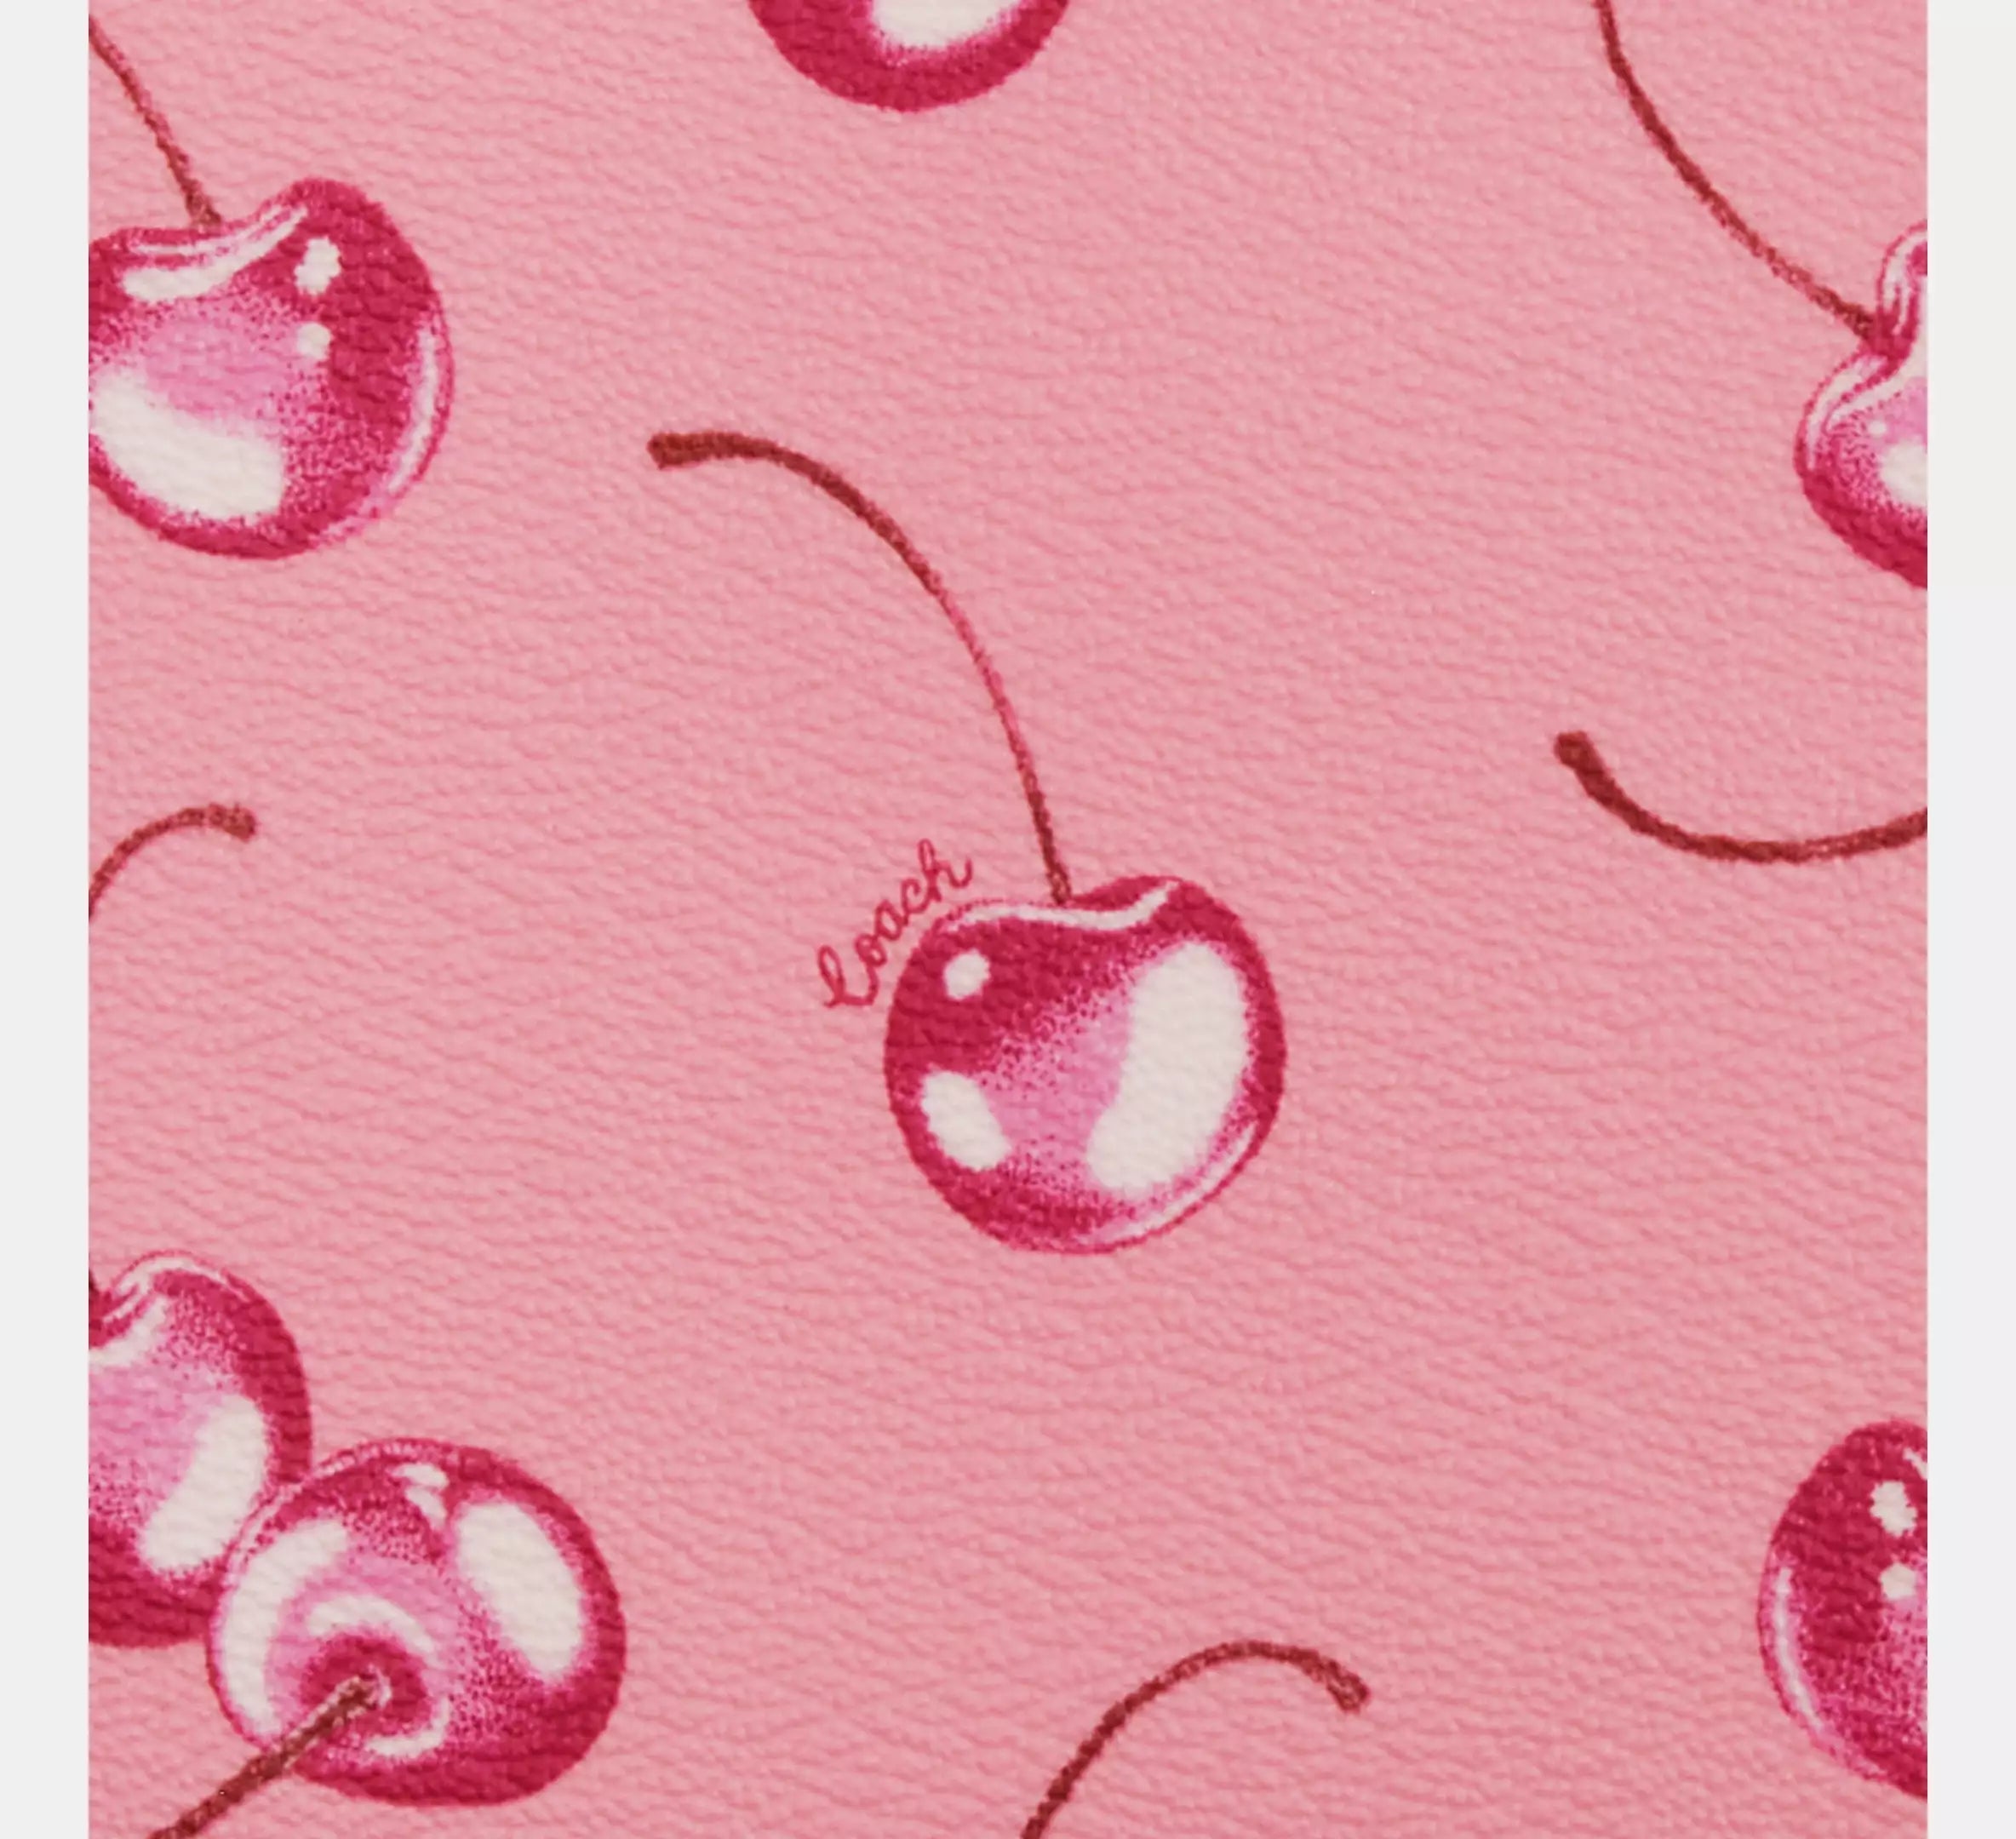 Notebook With Cherry Print